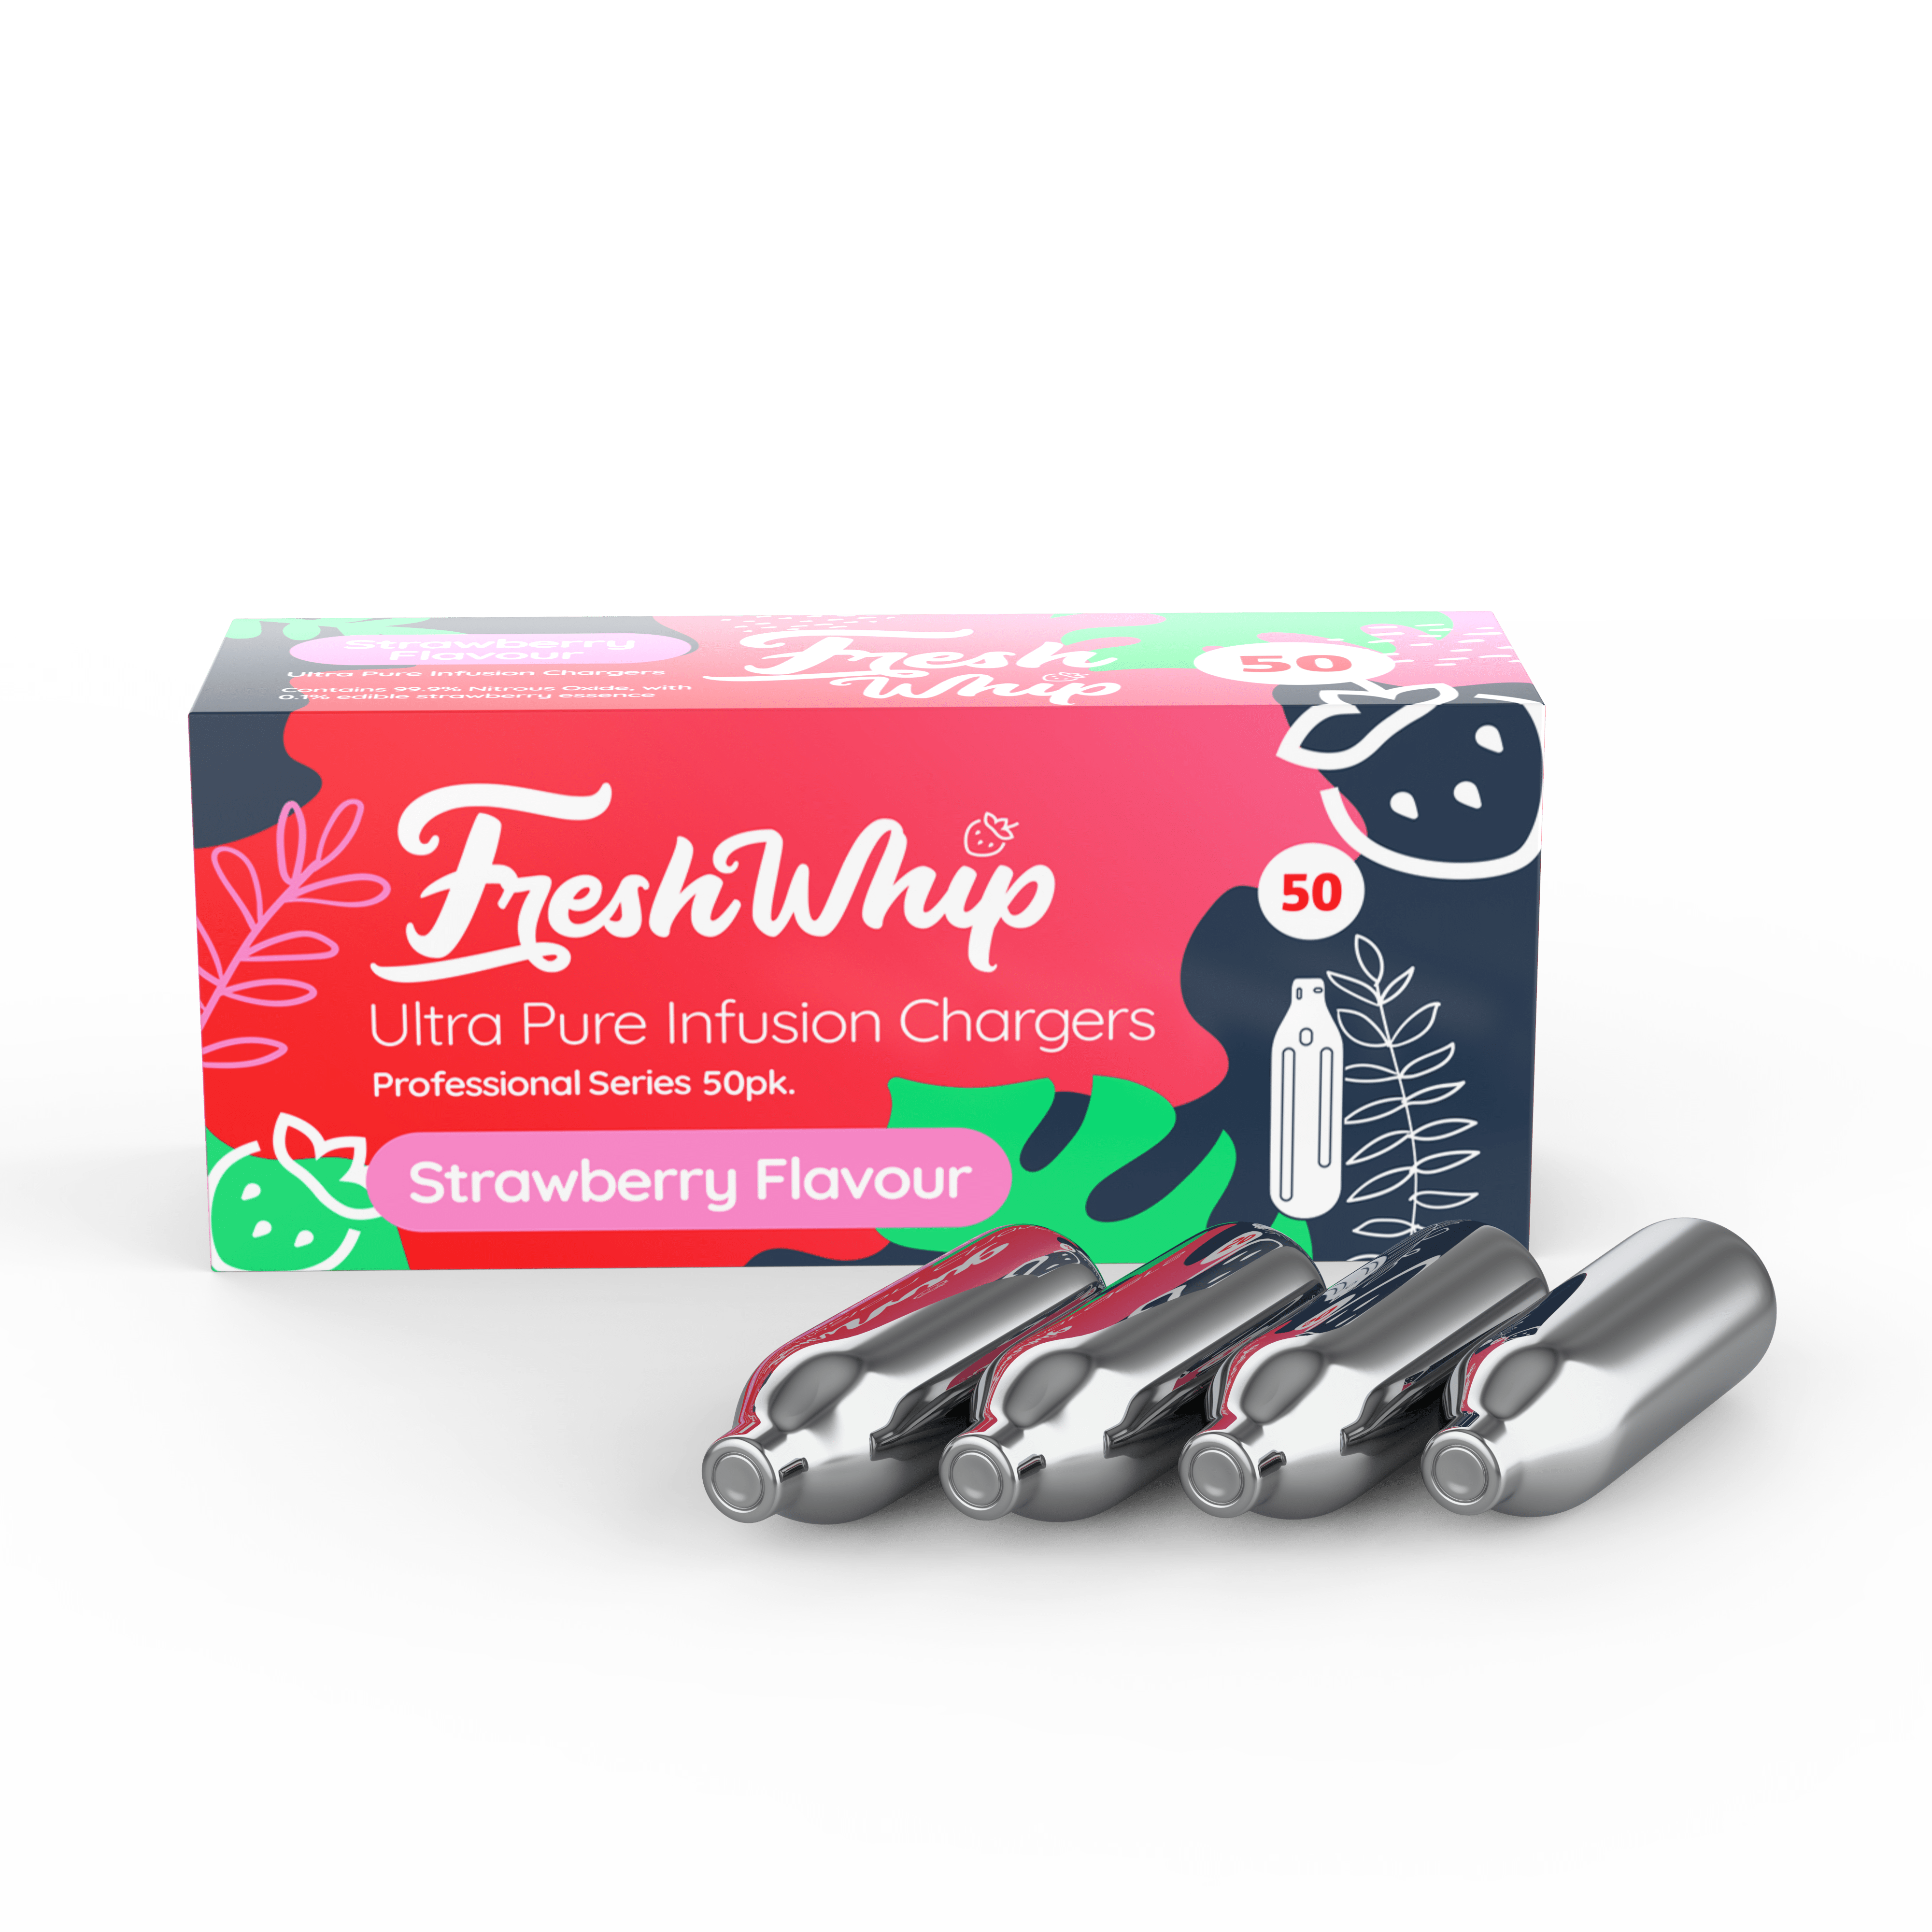 Wholesale FreshWhip Strawberry Infusion Chargers 8.2g - 50pks